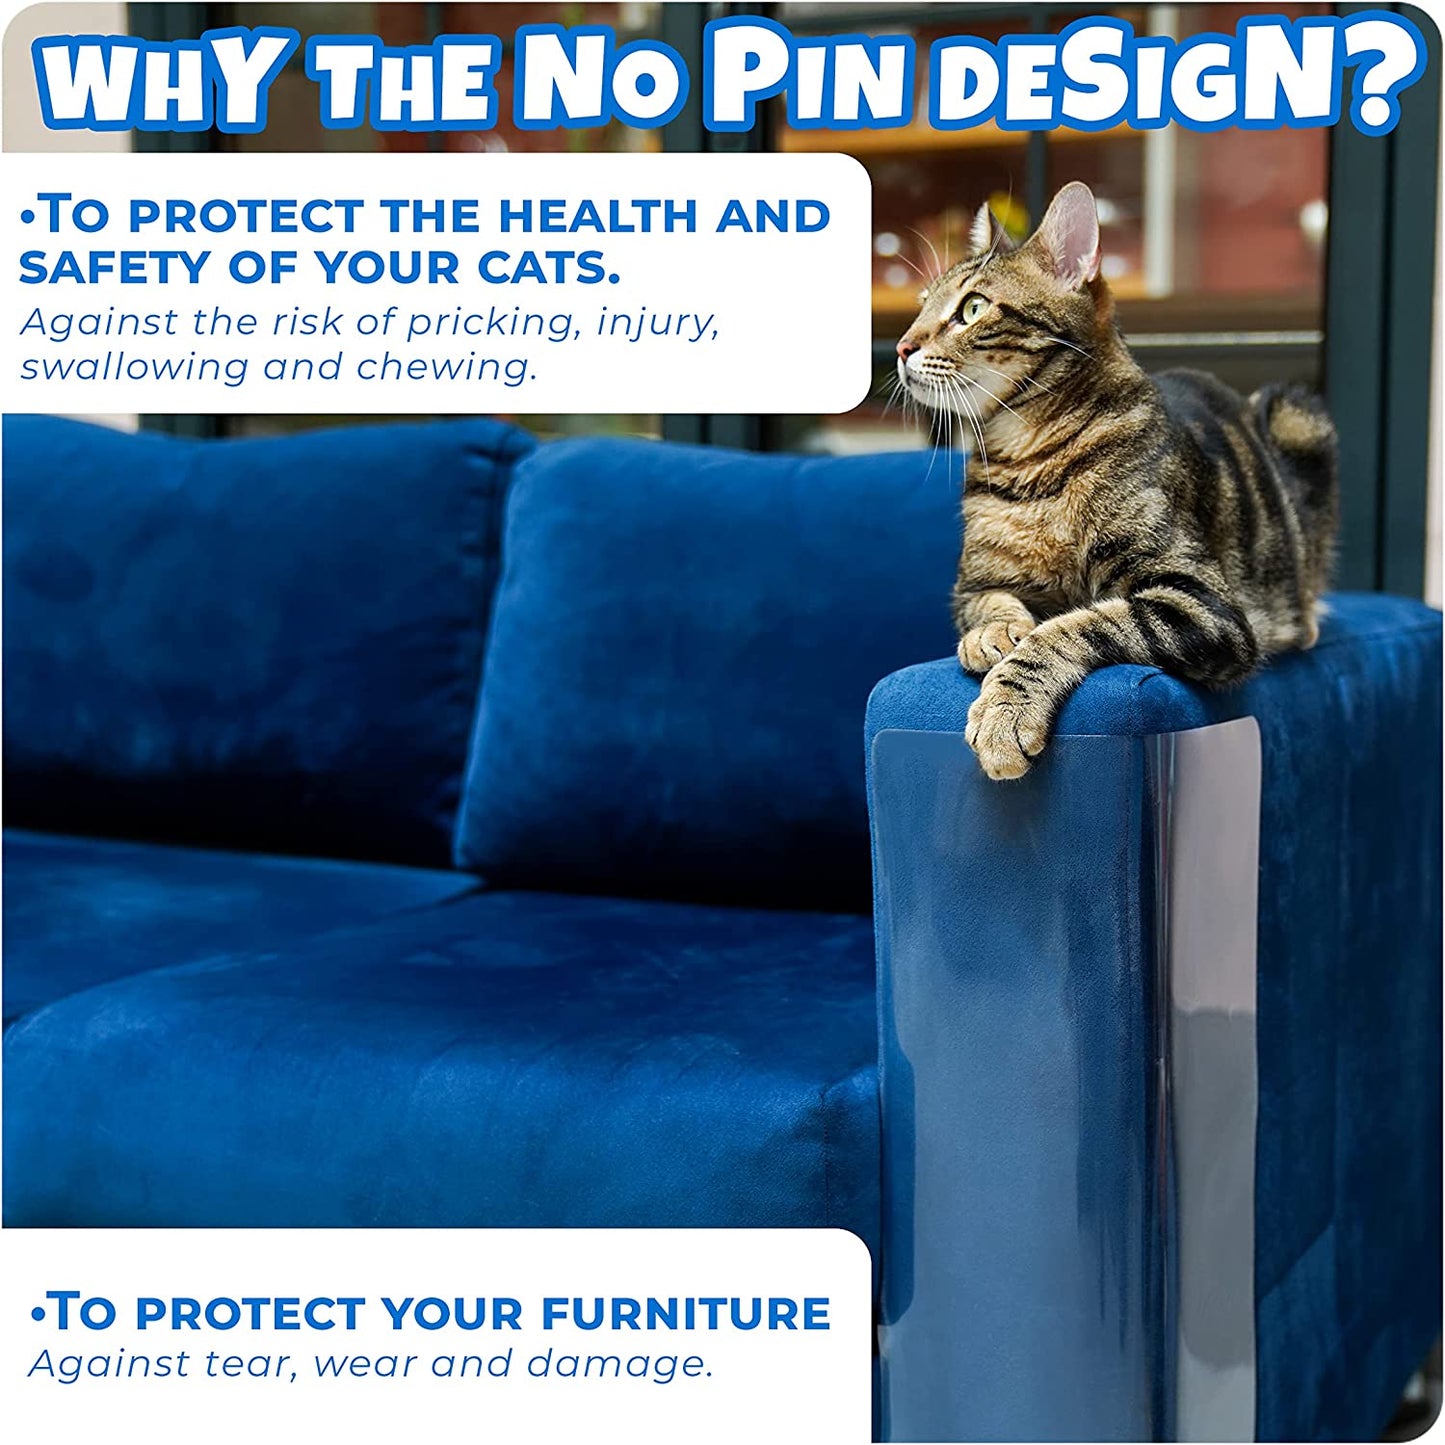 New Cat Scratch Furniture Protector- No Pin | Pet Repellent for Couch | One Side Tape Sheets, 17x12 Inches E-MARQUE (Pack of 10)